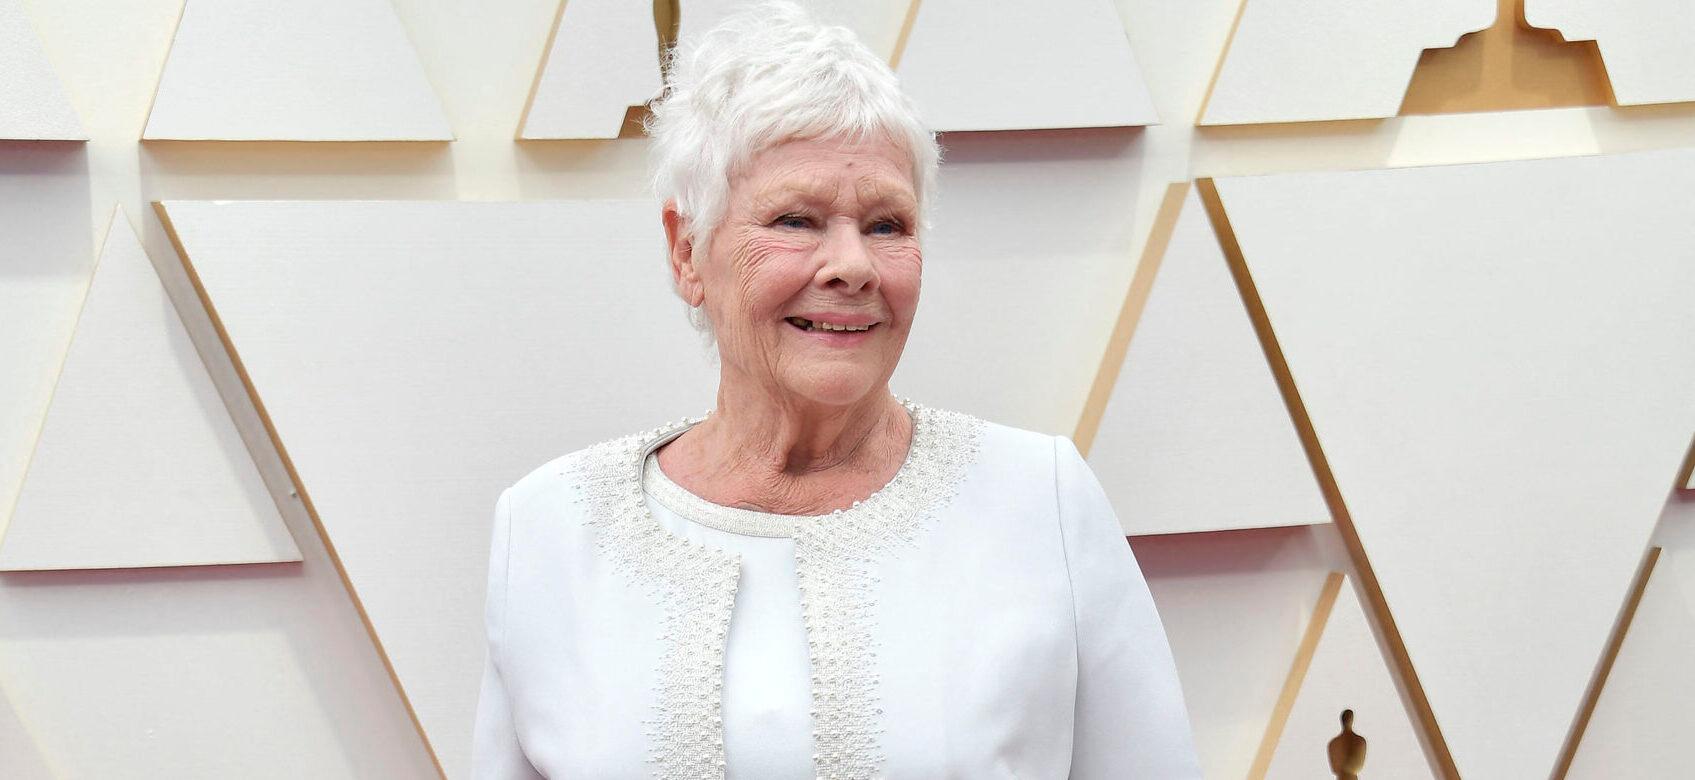 Judi Dench Has No Plans To Retire As Eyesight Deteriorates, Relying On Friends & ‘Photographic Memory’